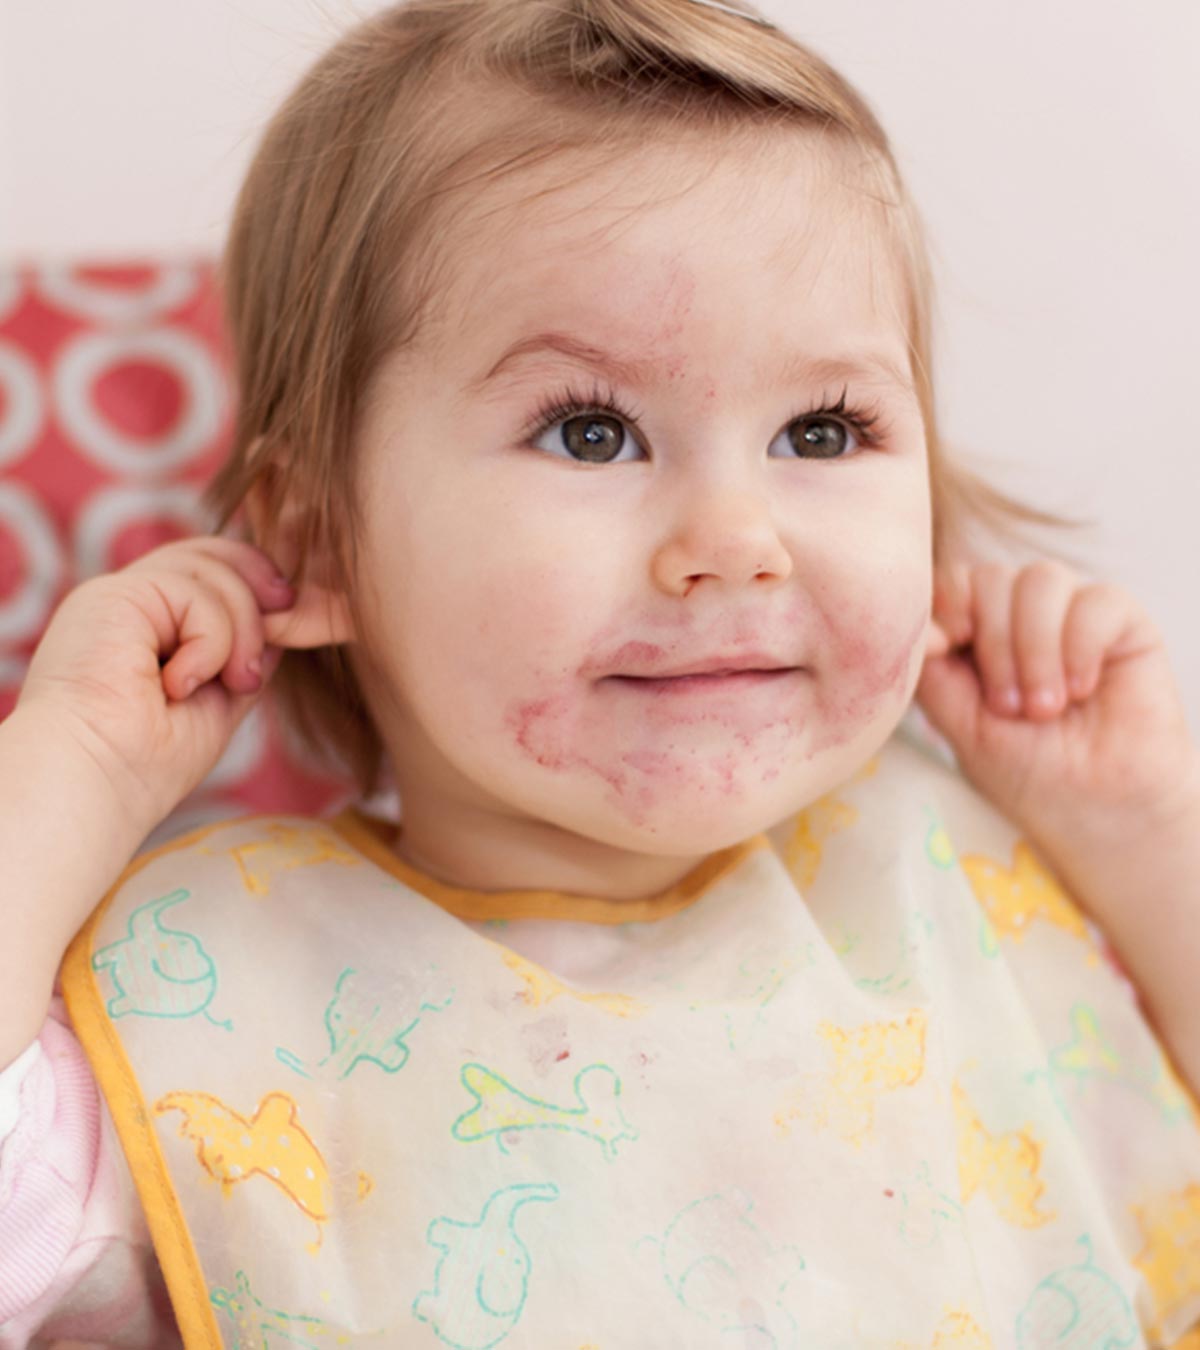 Babies Pulling Ears: Top Reasons, Treatment & When To Worry